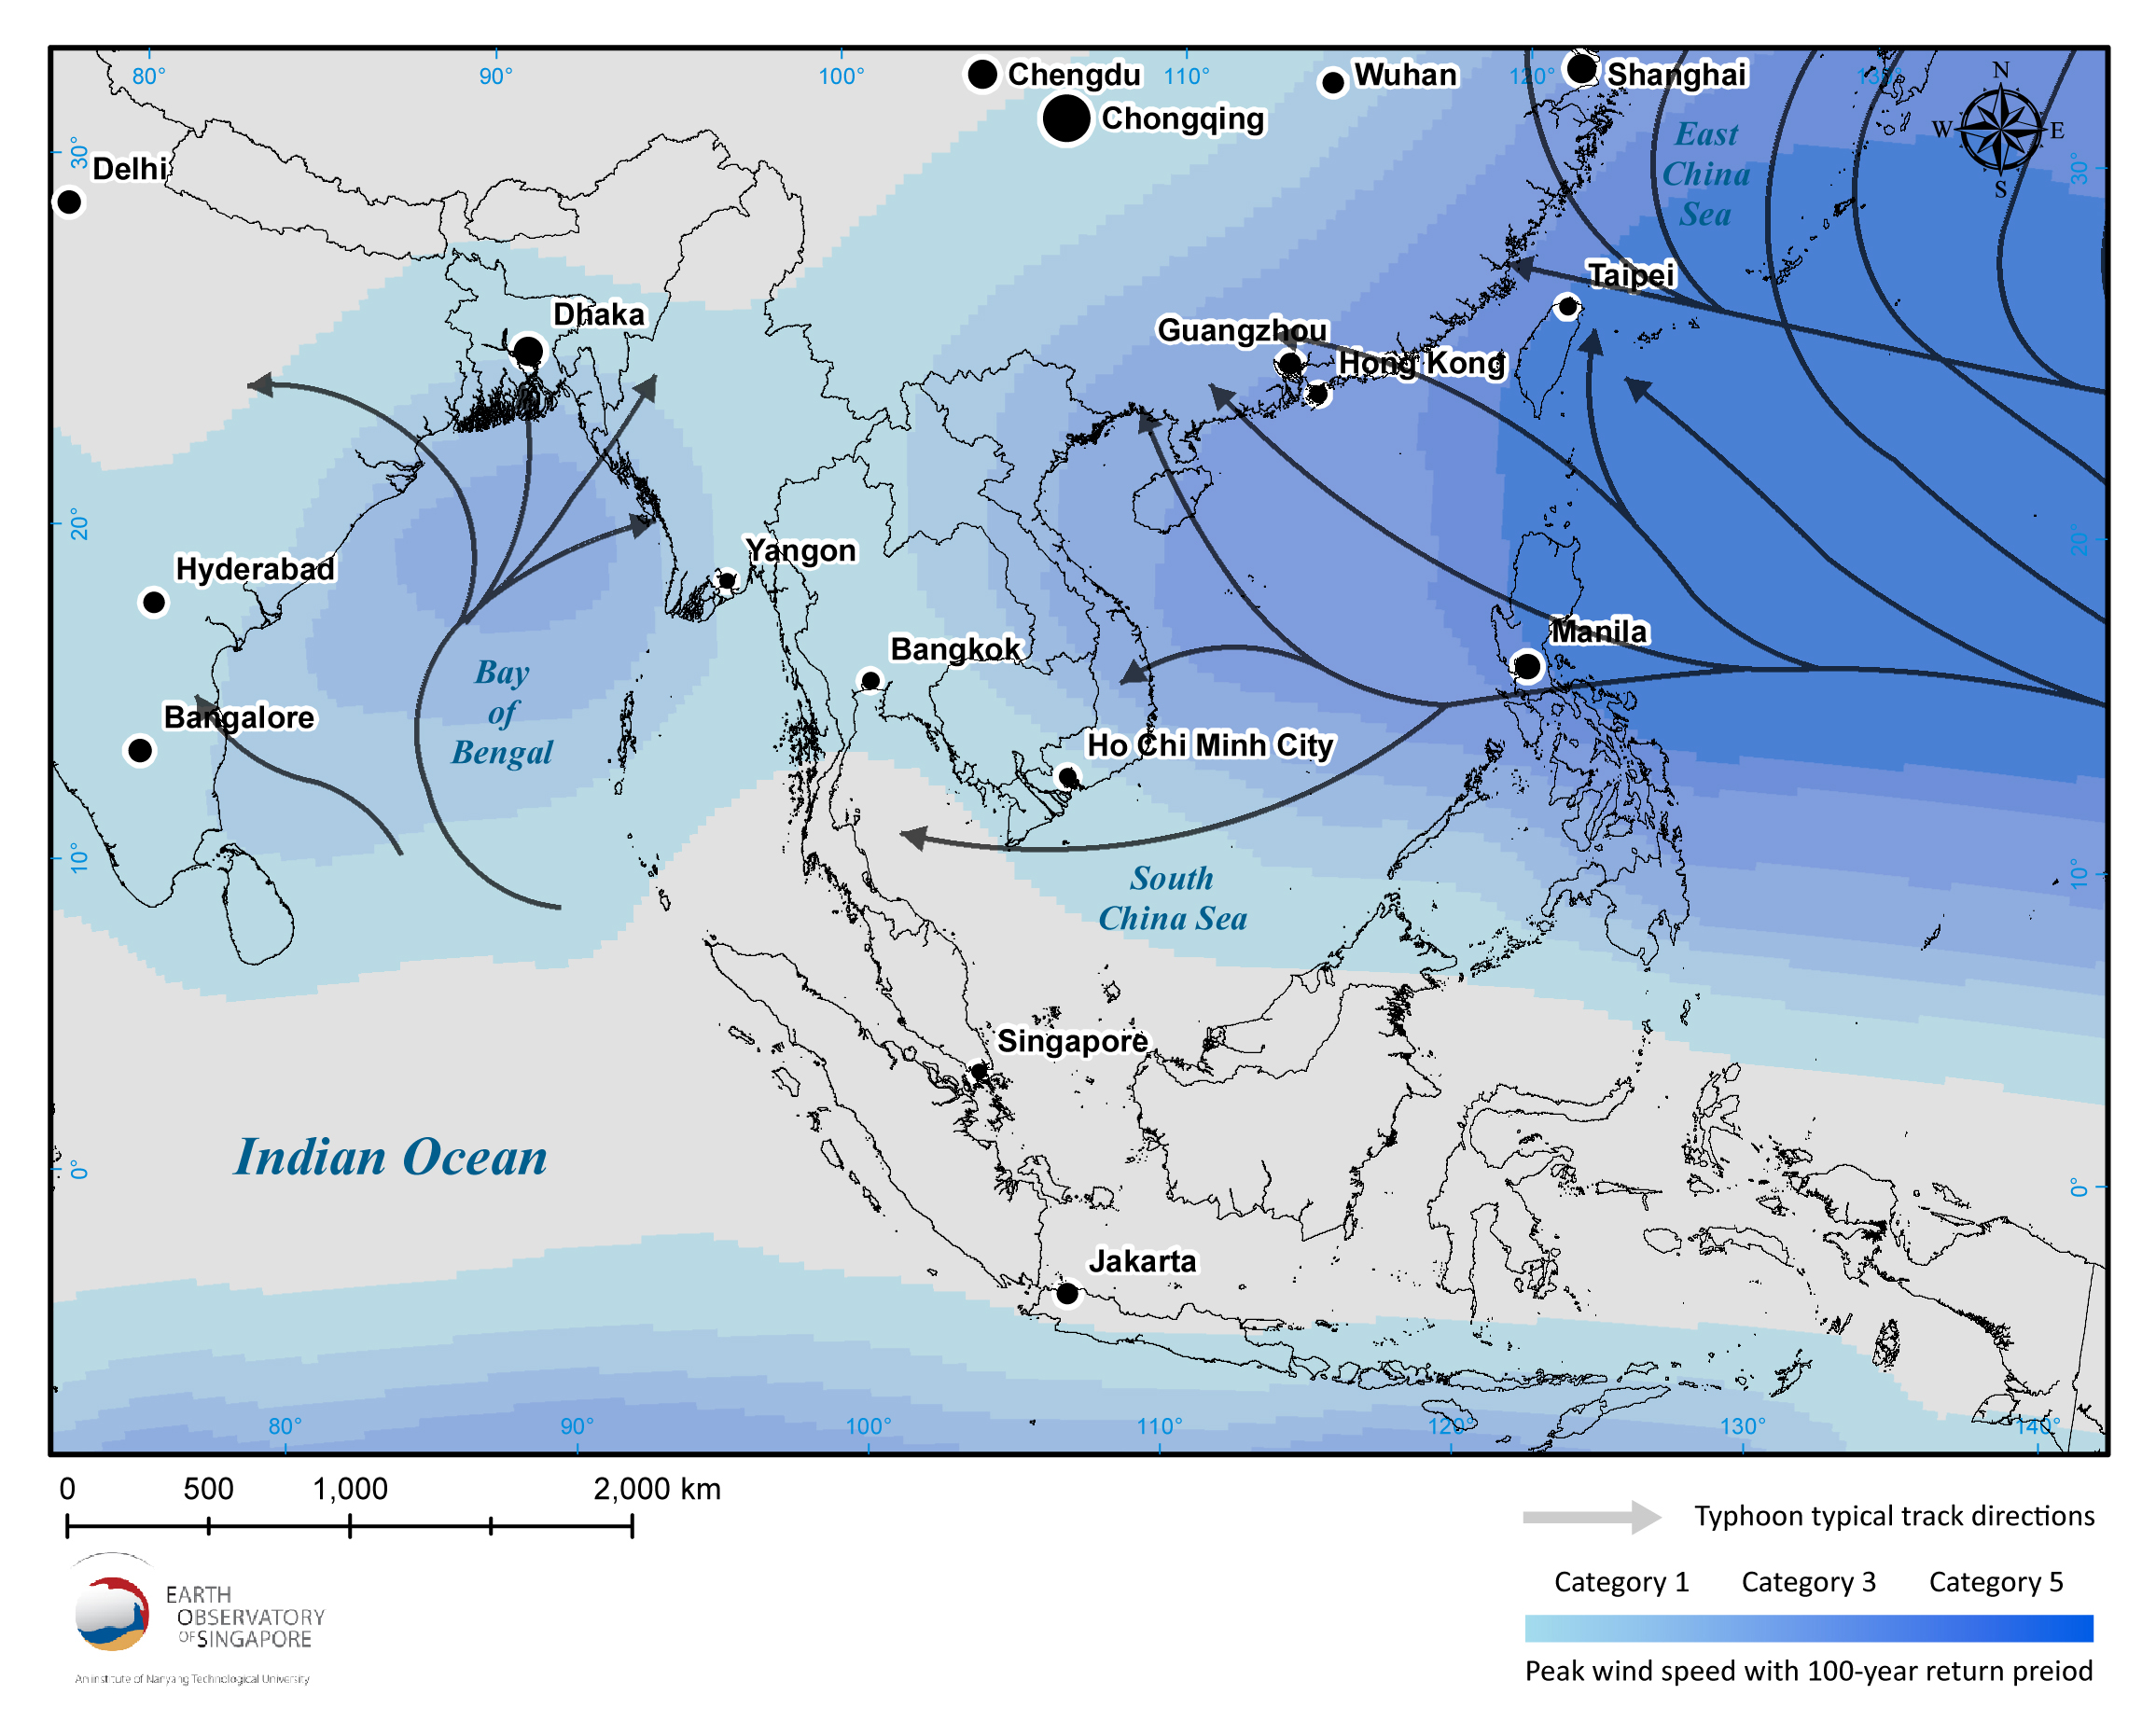 The blue-coloured gradient in the ocean shows the long-term typhoon wind hazard, where the peak gust wind velocity has a 10 per cent probability to exceed the thresholds in 10 years. The grey arrows show the approximate directions of past major typhoons. Data from Global Assessment Report 2013 (Source: Wang Yu/ Earth Observatory of Singapore)